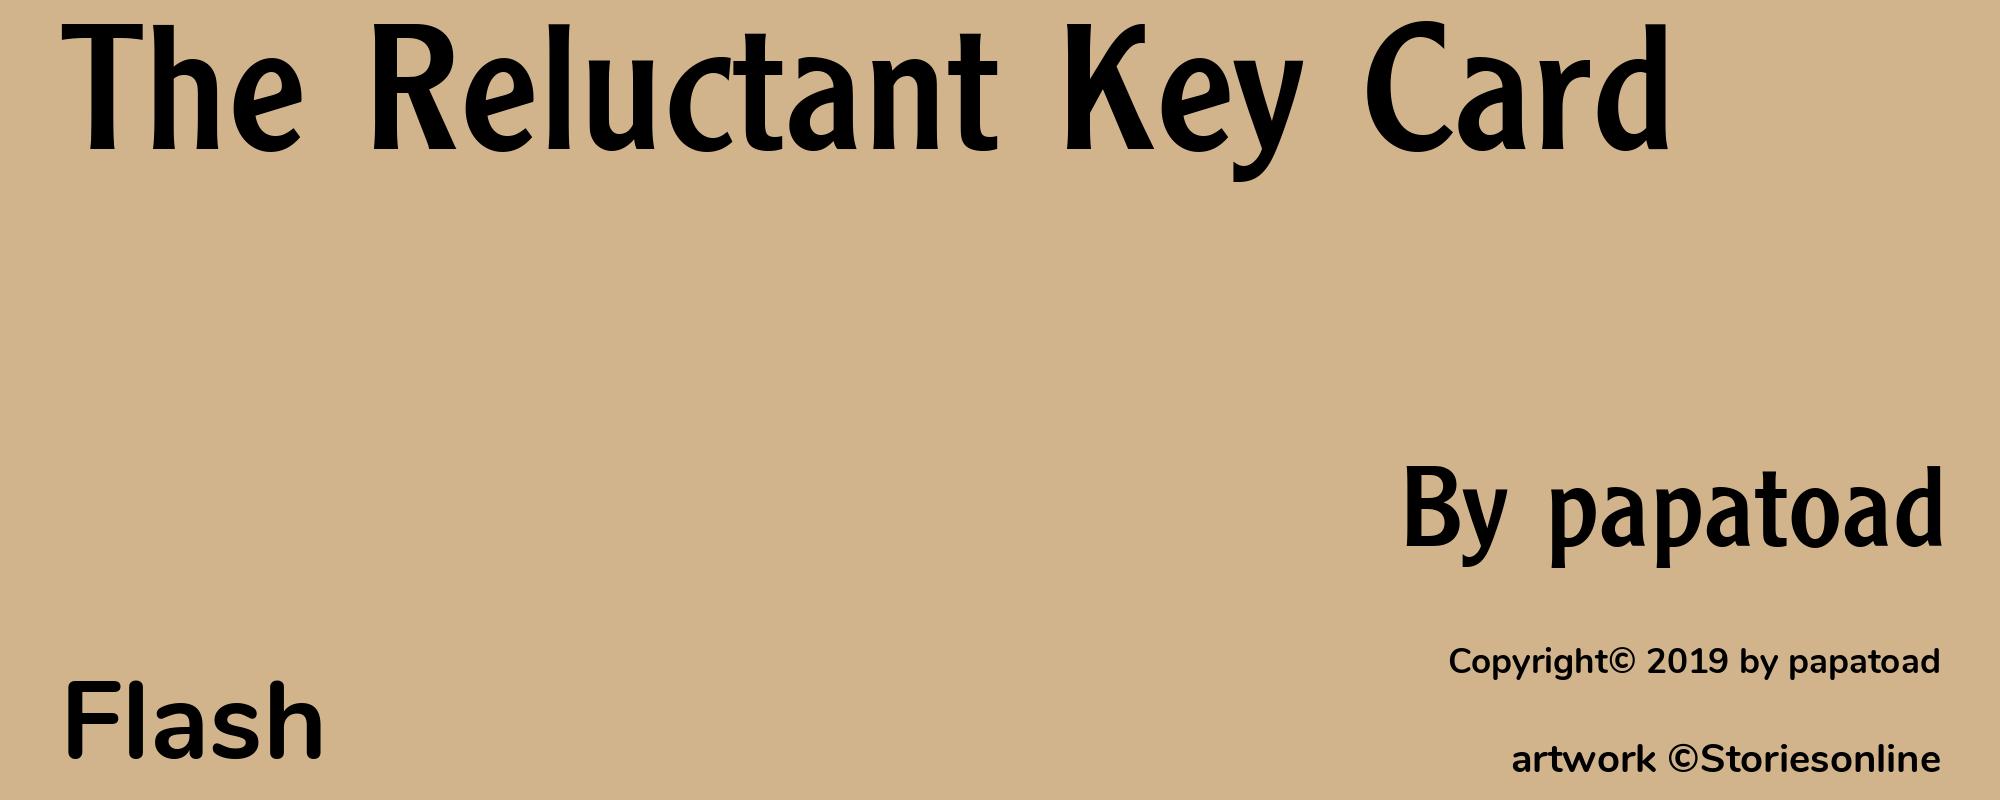 The Reluctant Key Card - Cover